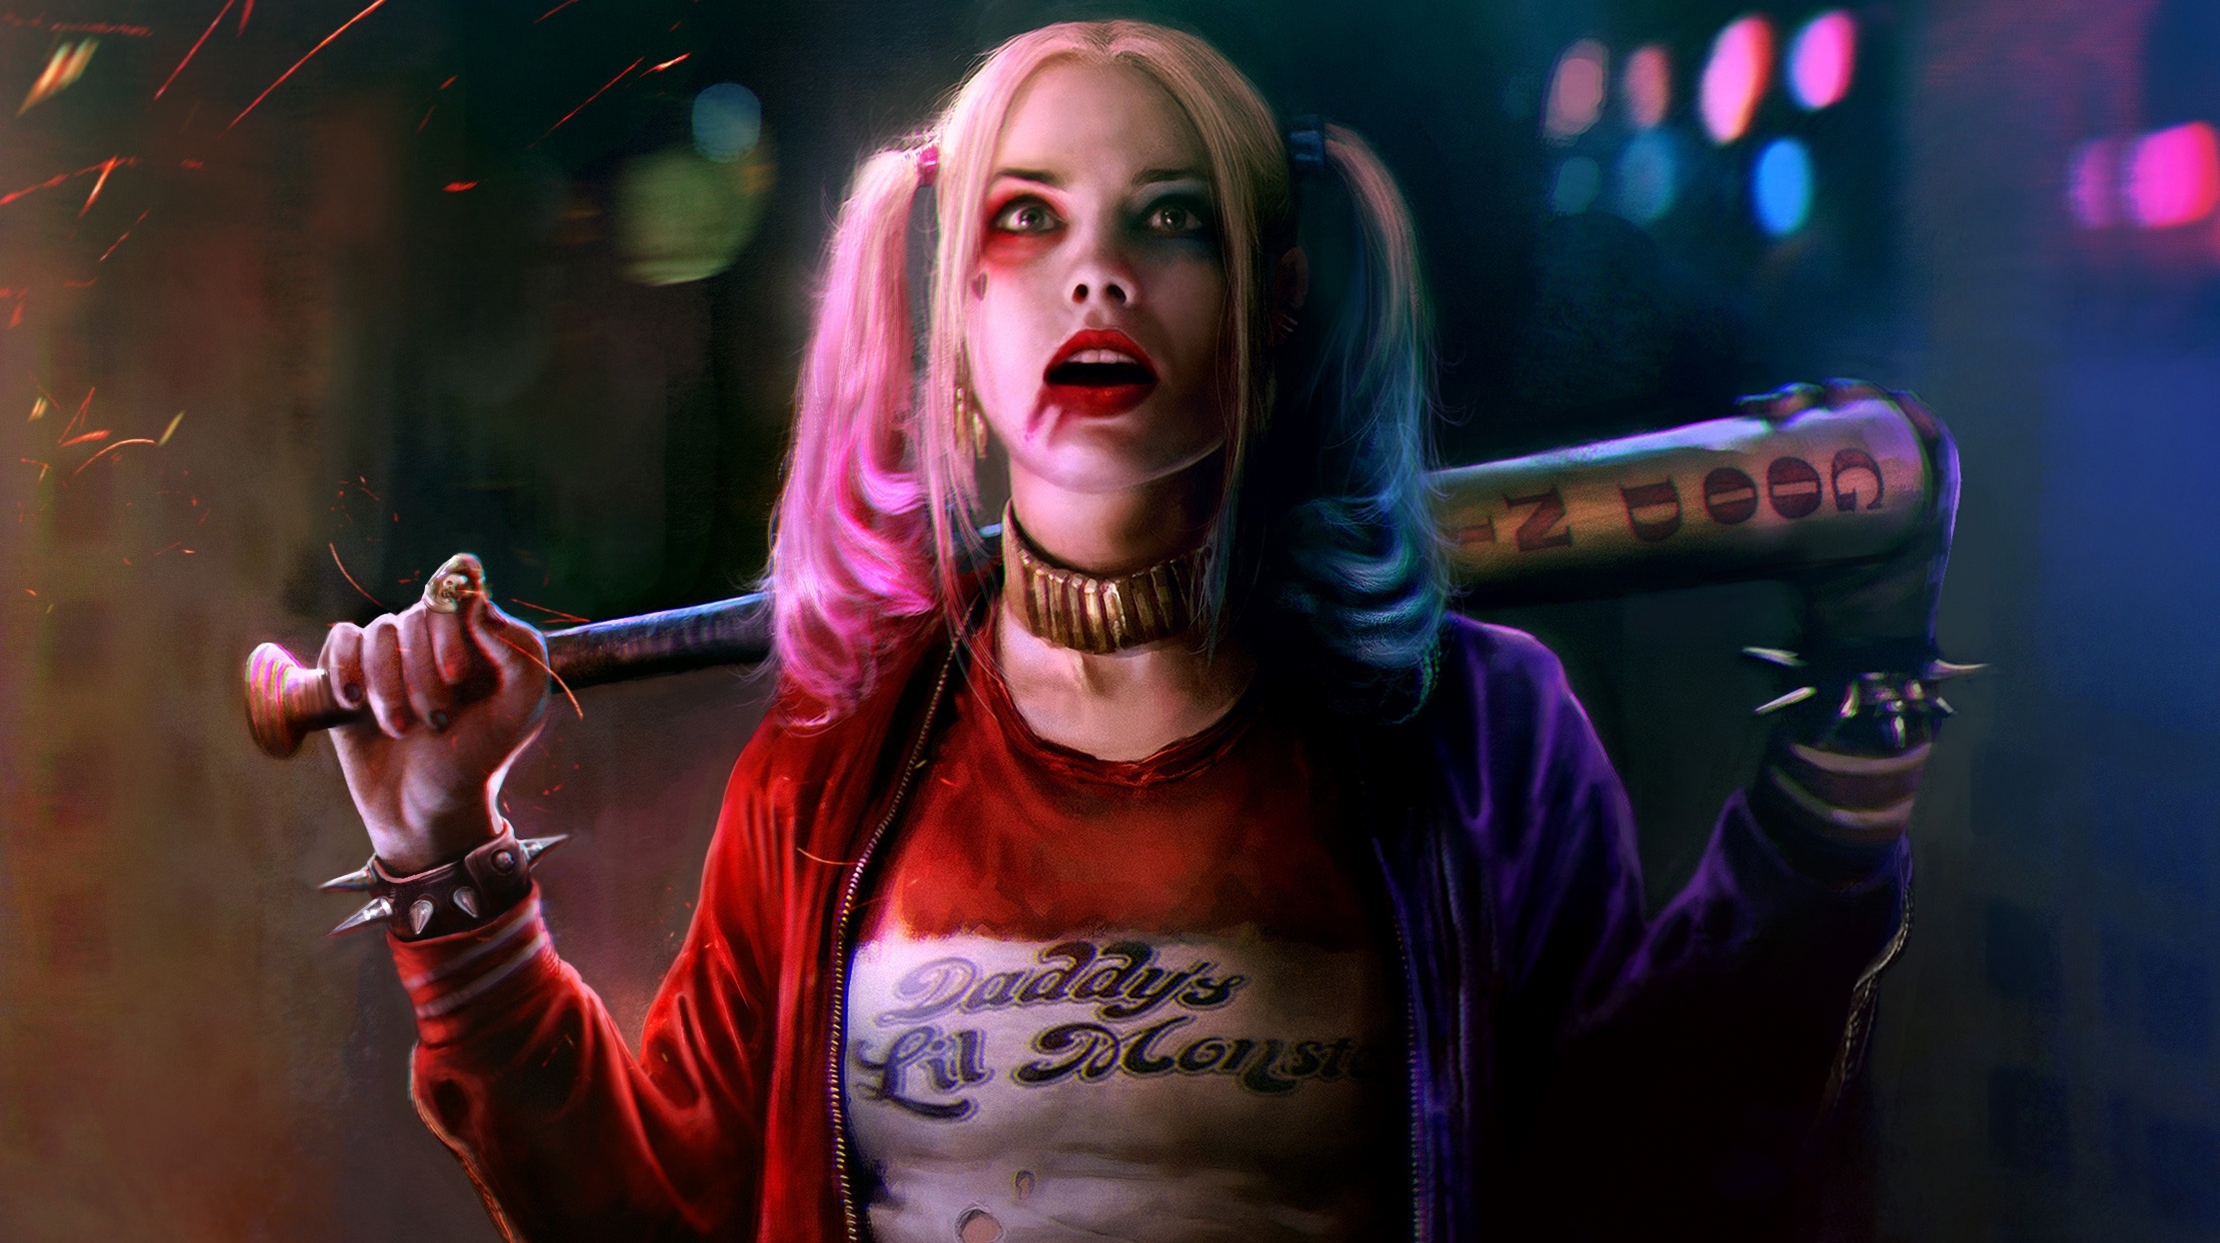 blonde, harley quinn, movie, collar, suicide squad, margot robbie, baseball bat, dc comics, spikes, two toned hair cell phone wallpapers